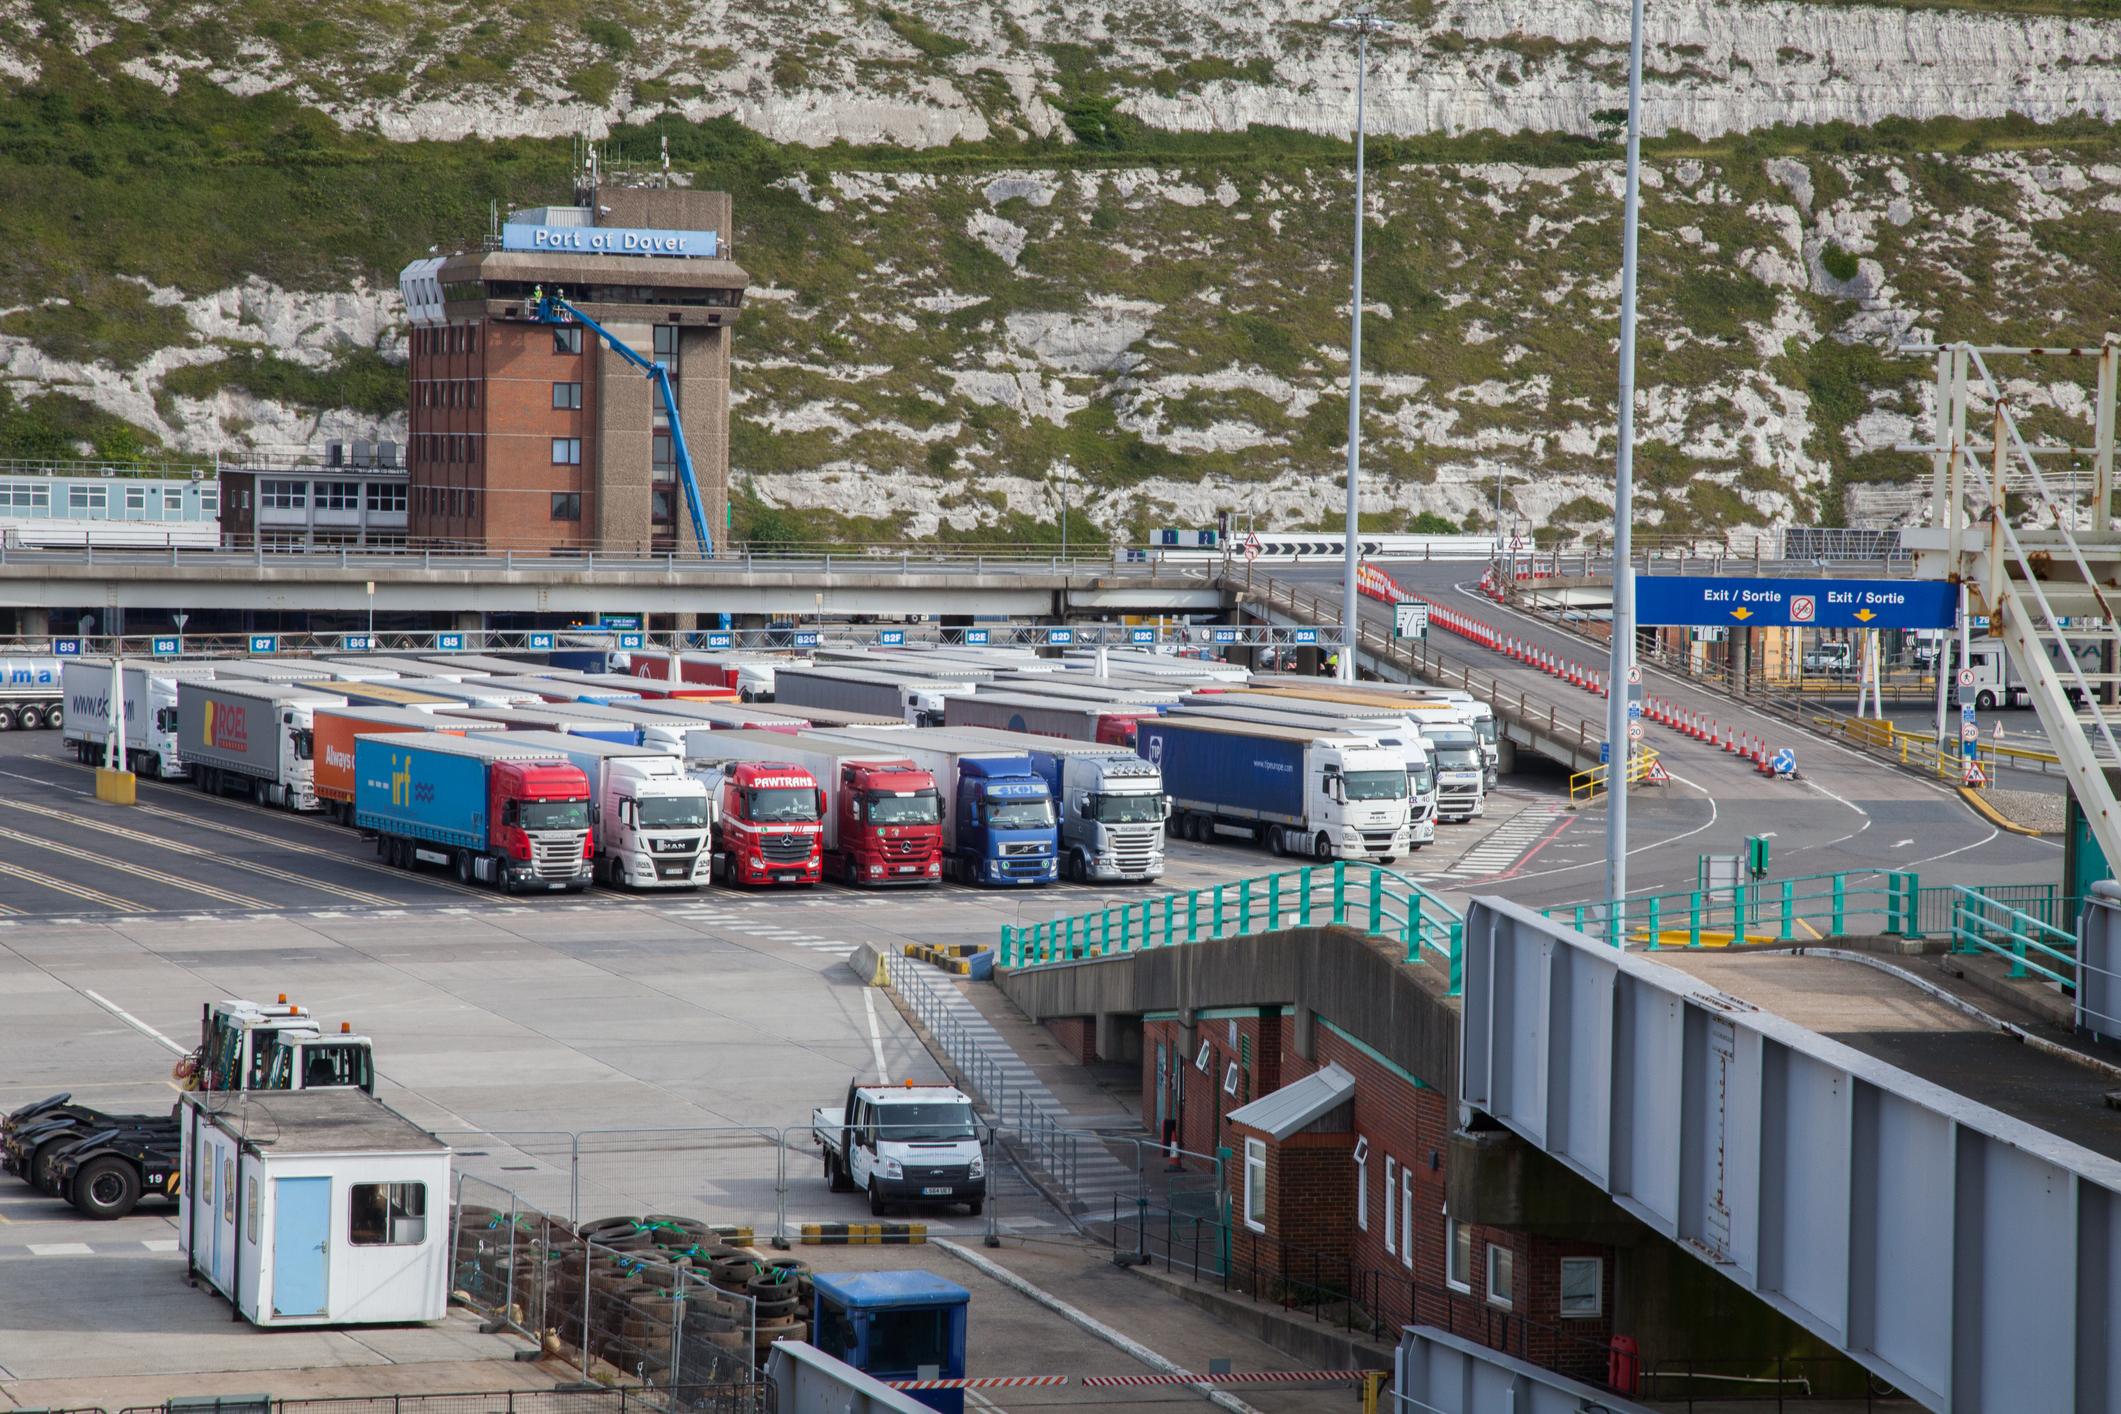 Brexit: UK borders still not ready for leaving single market at end of year, MPs told